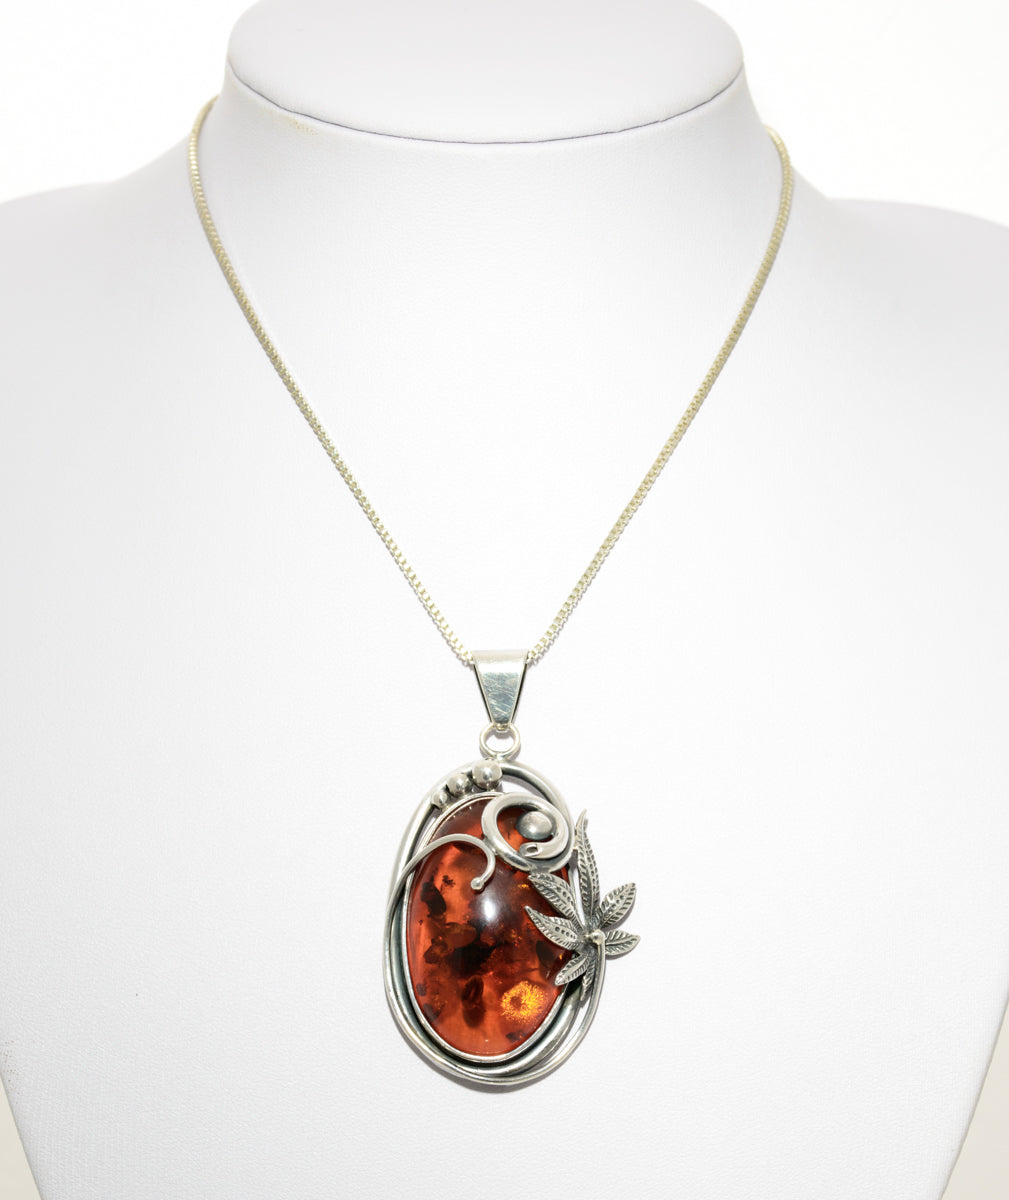 Vintage Large Statement Amber Pendant Necklace Sterling Silver & Box Chain (A1451)